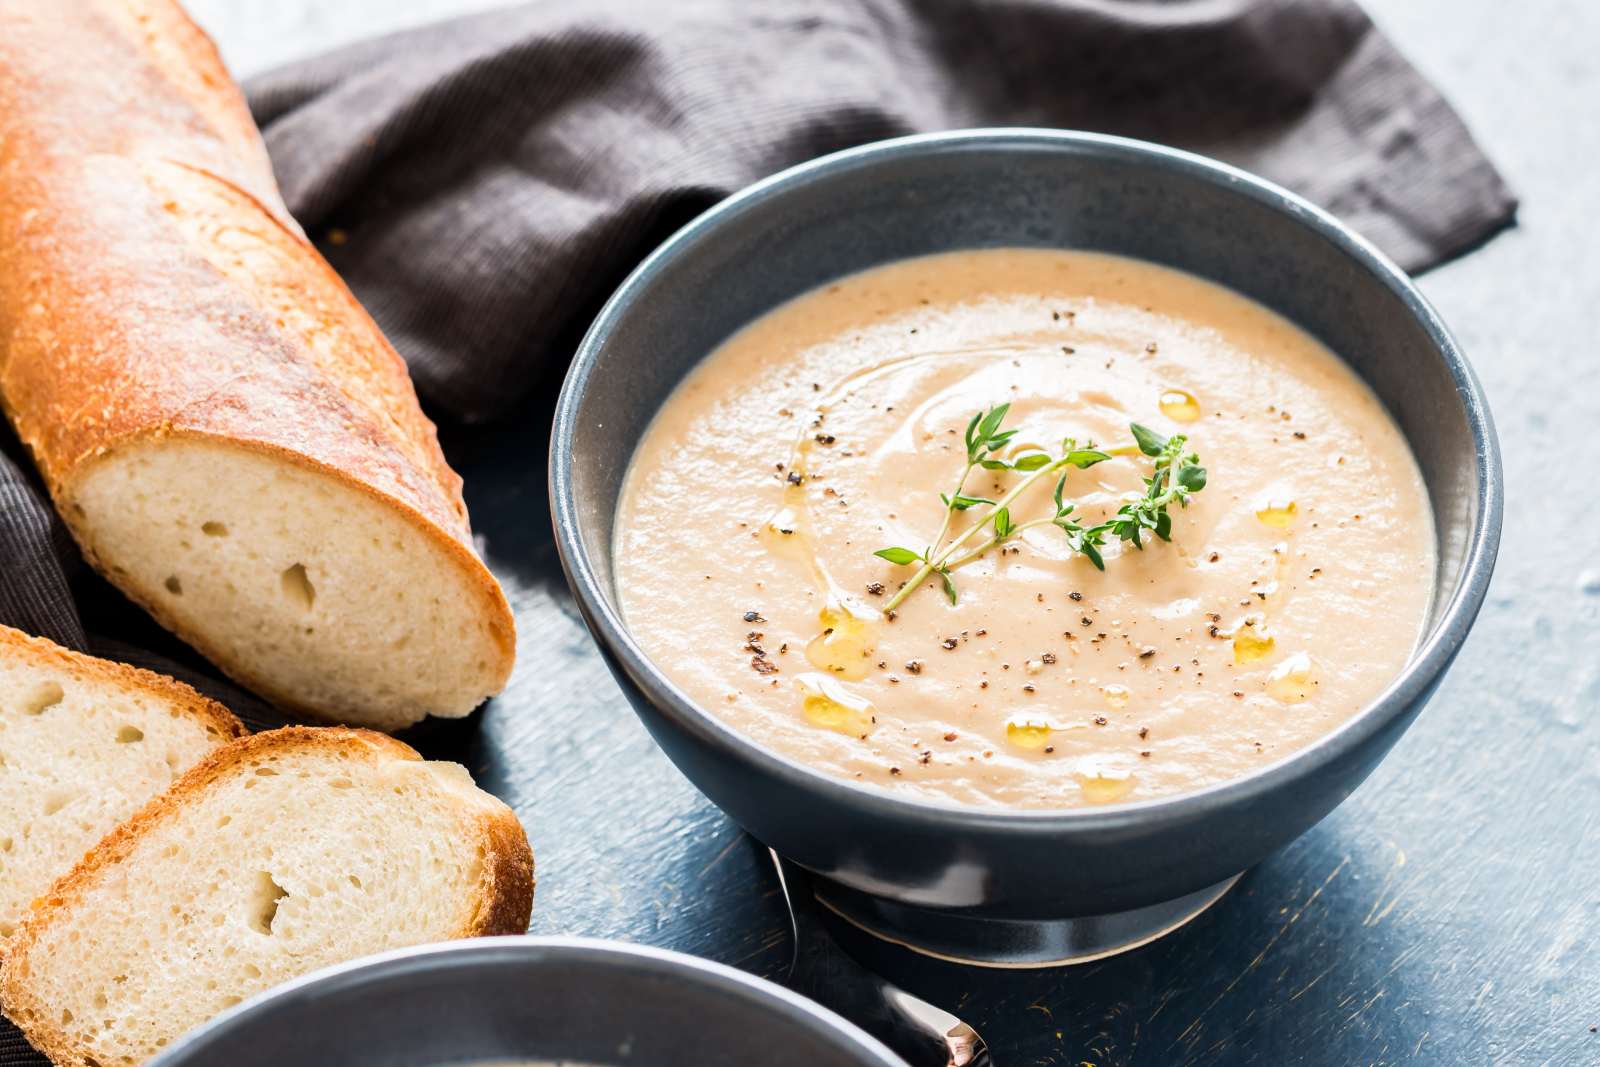 Spiced Cauliflower And Almond Soup Recipe